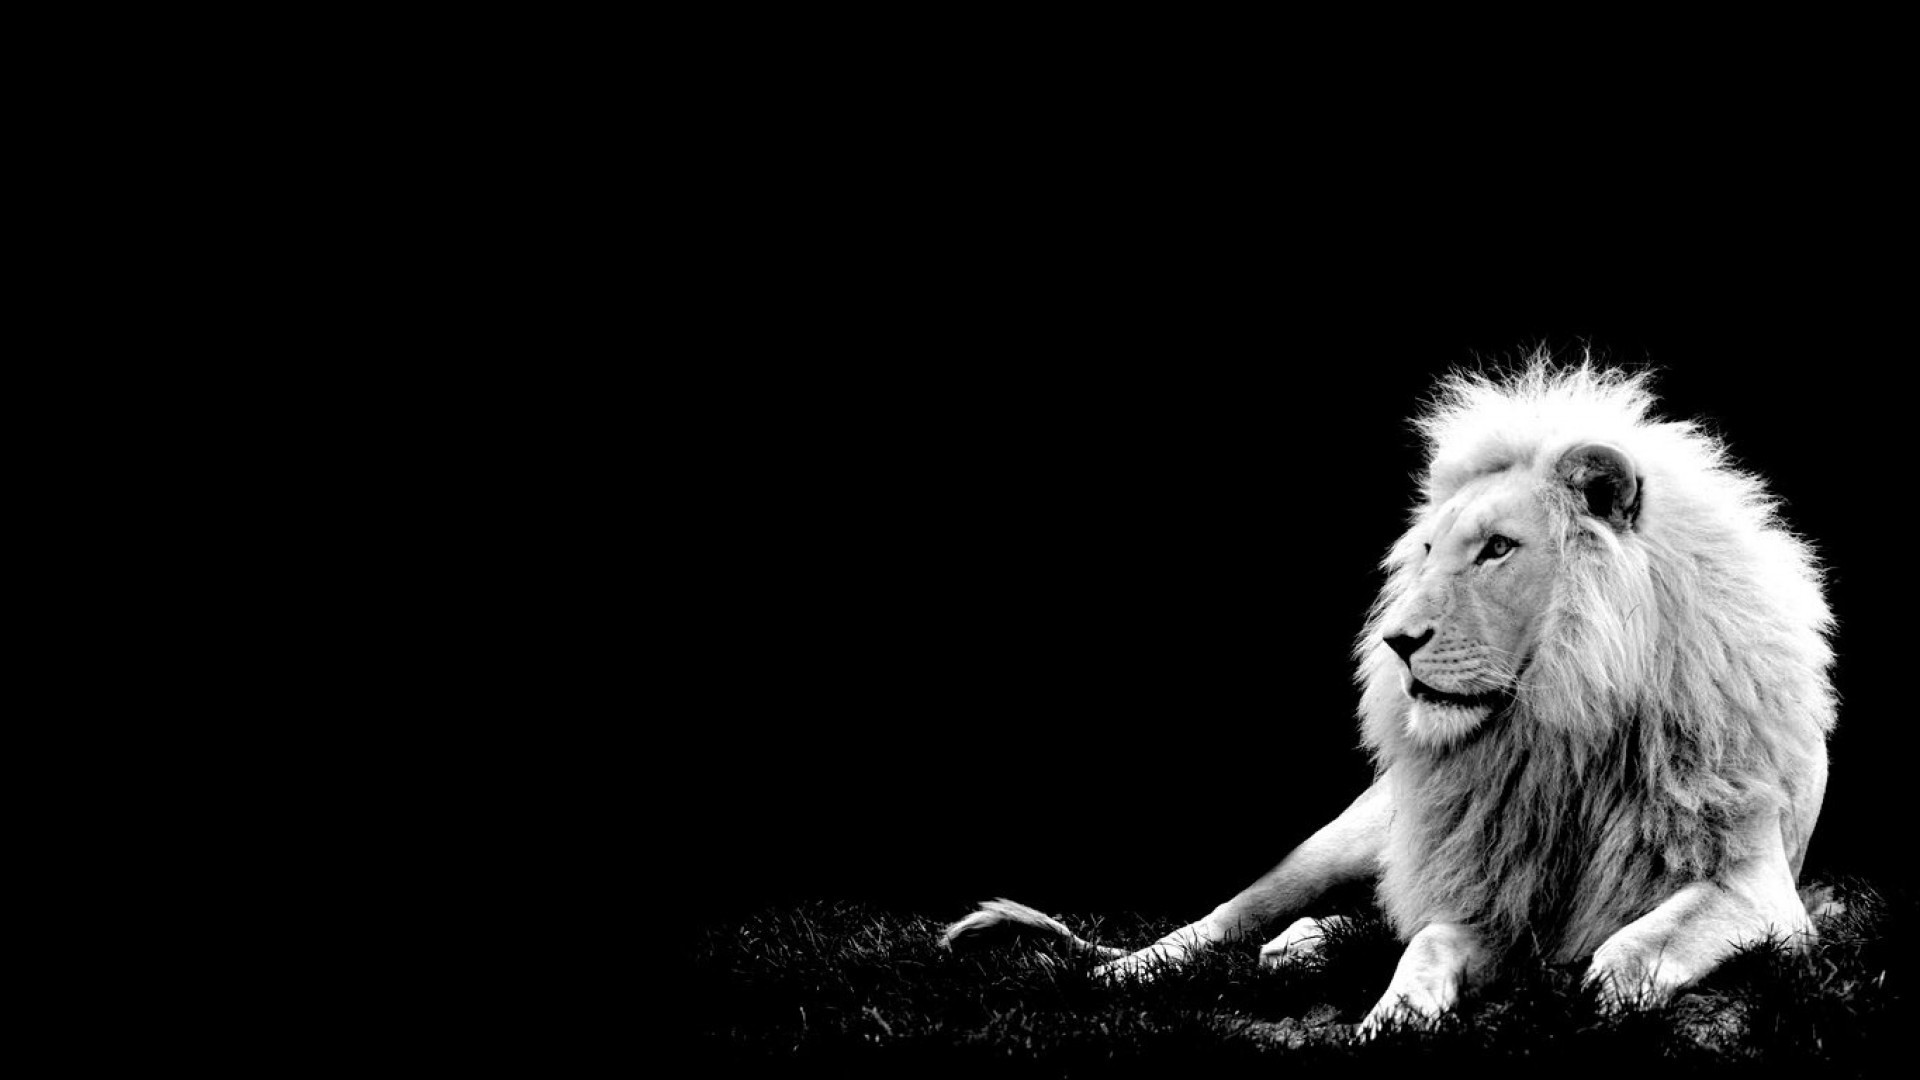 1920x1080 Lion Wallpaper HD Pictures One HD Wallpaper Pictures Backgrounds Lion Image Wallpapers  Wallpapers)